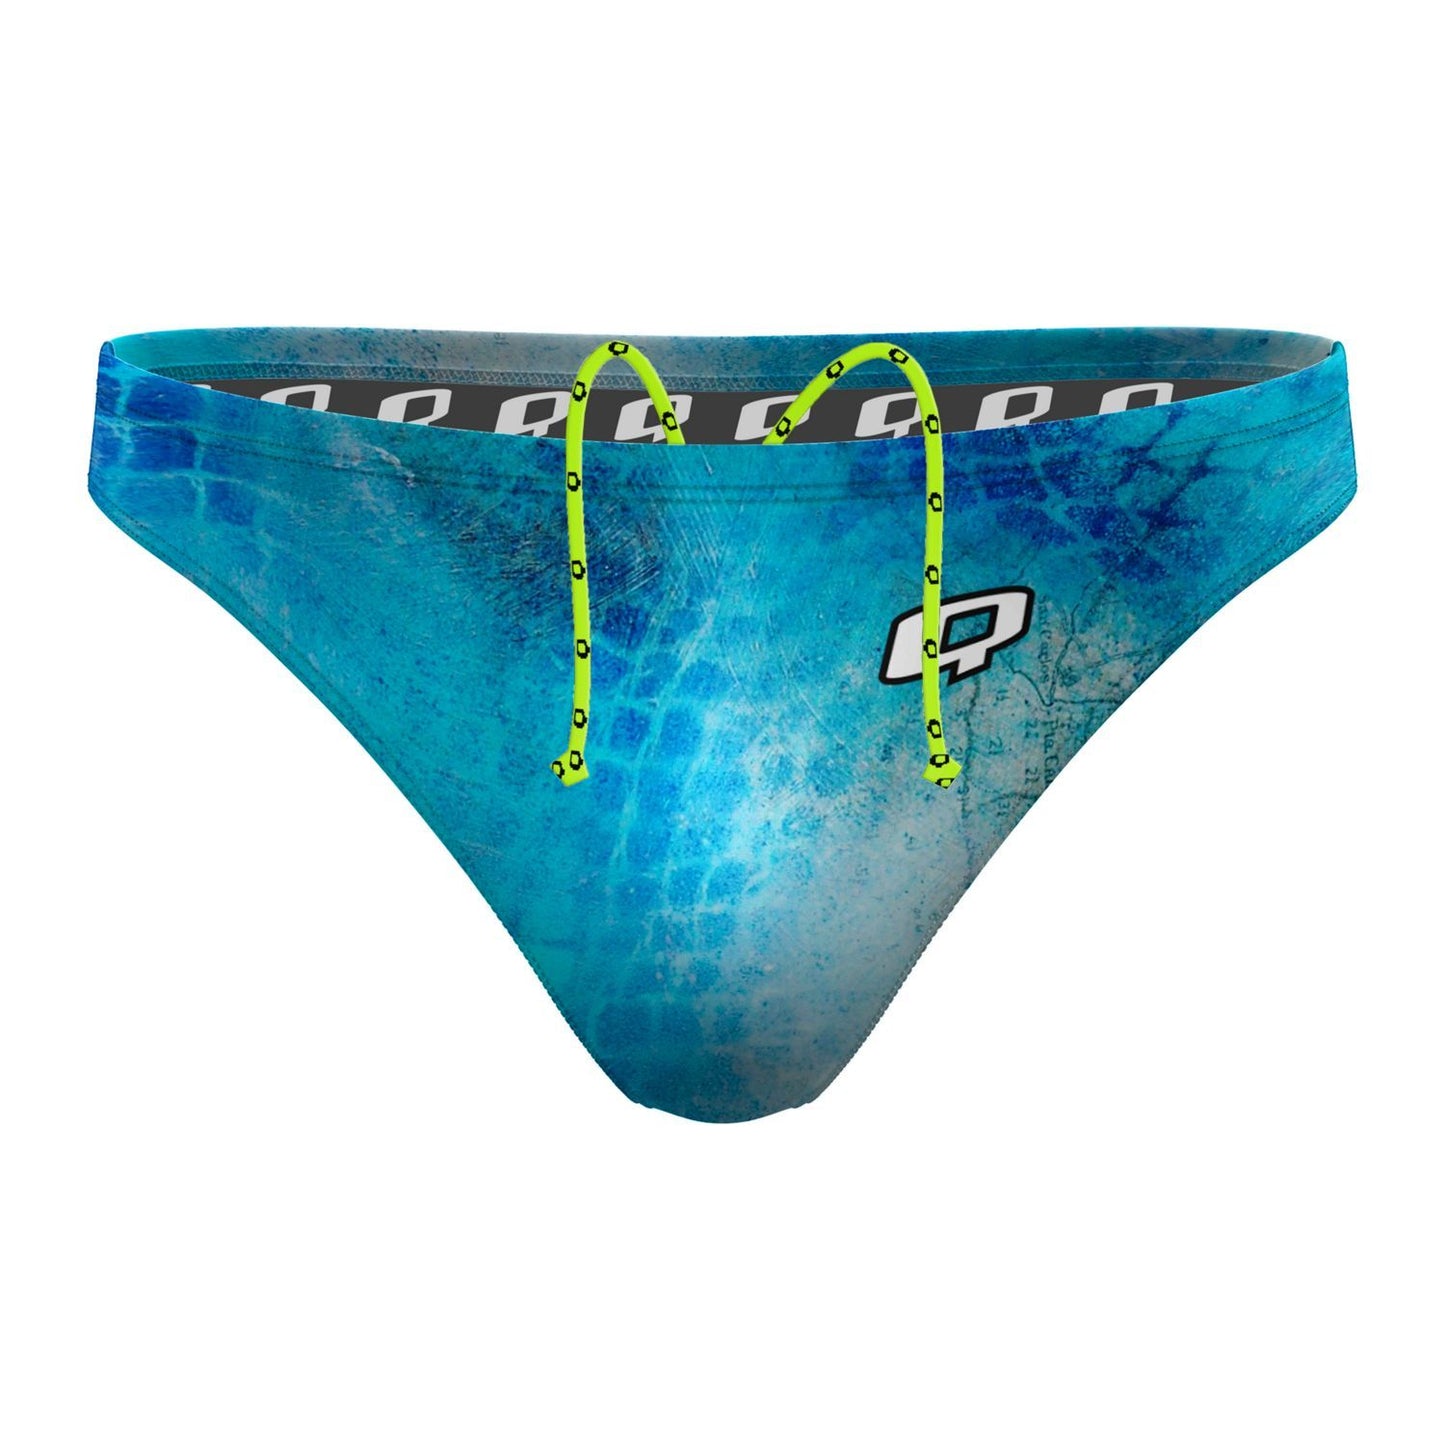 Catch Me Waterpolo Brief